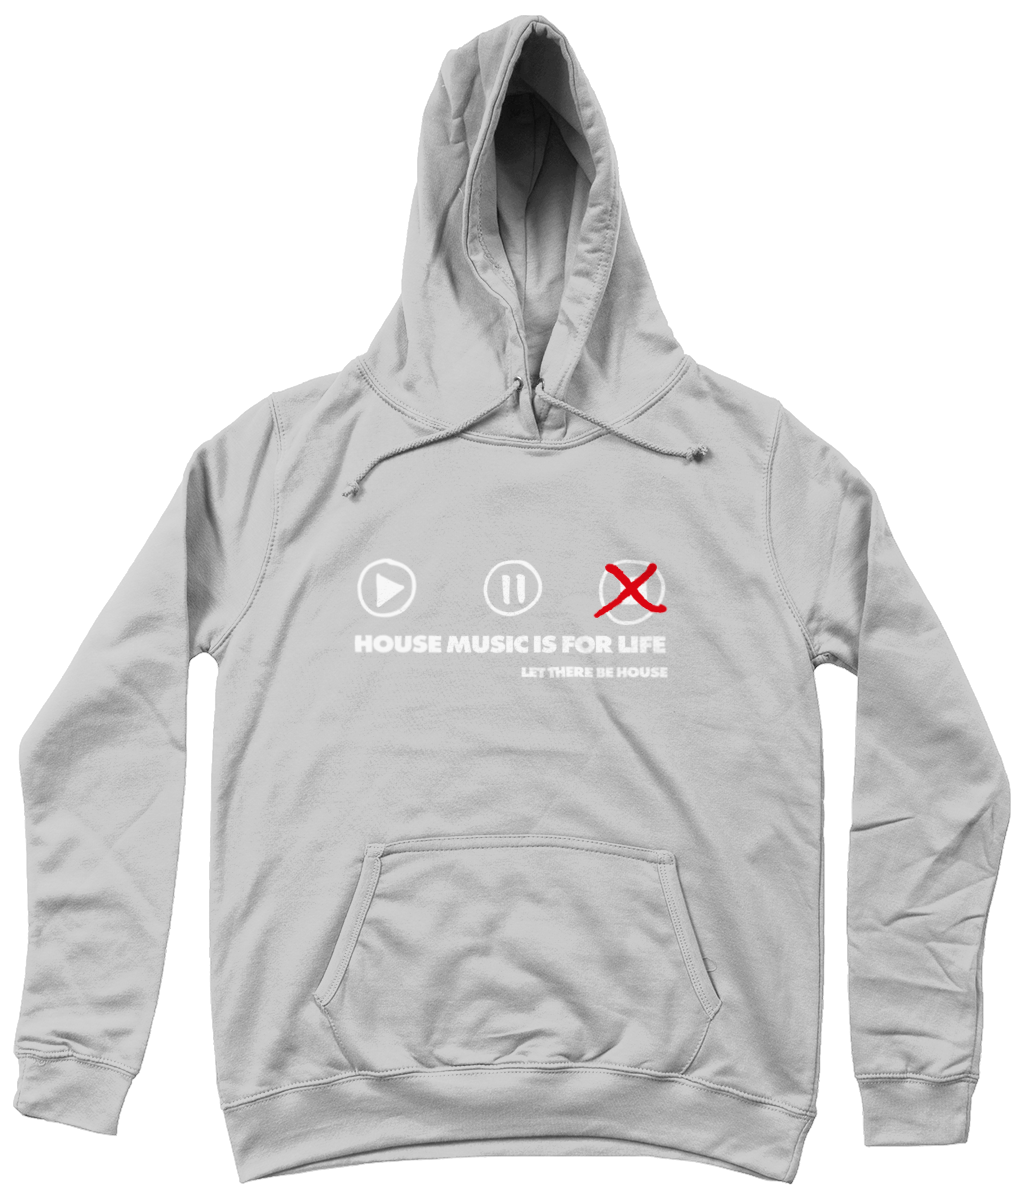 Women's Hoodie For Life